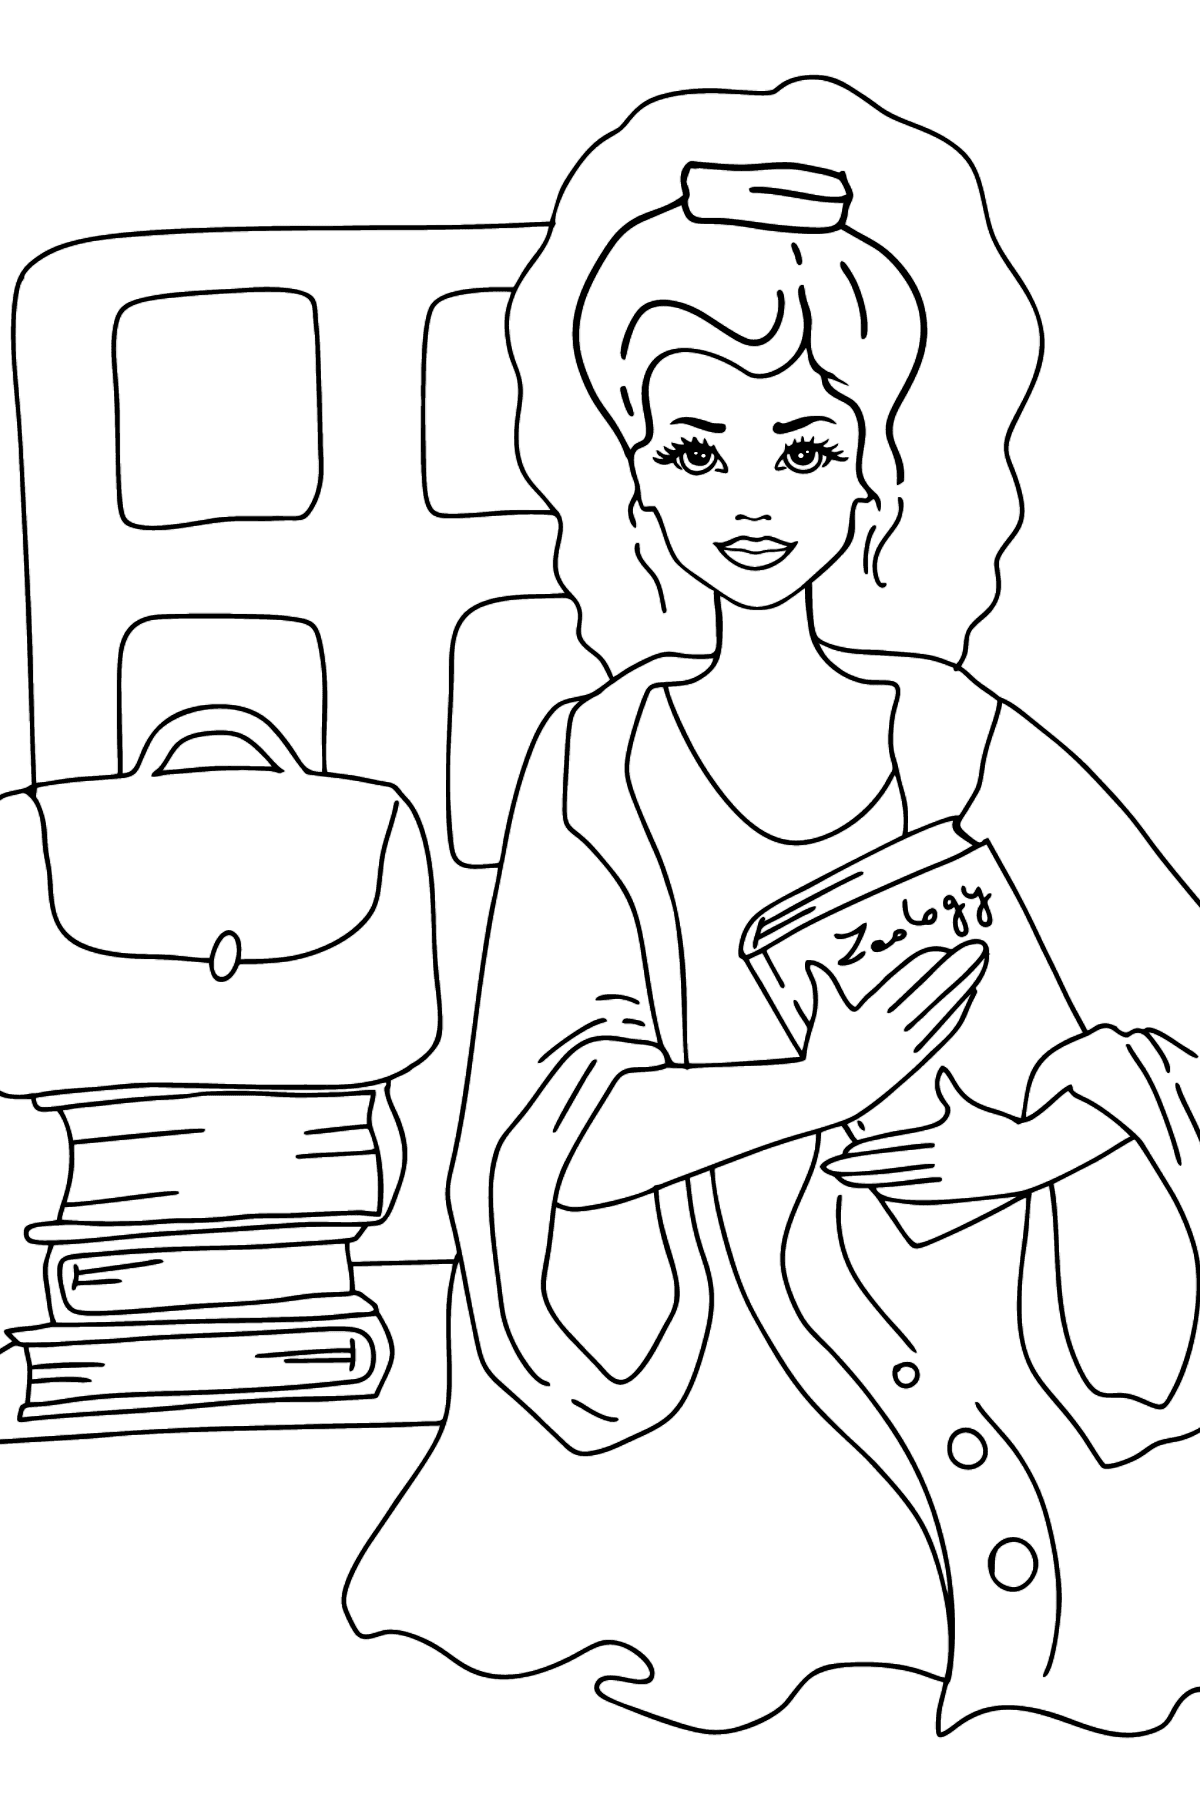 Barbie Doll Student coloring page - Coloring Pages for Kids